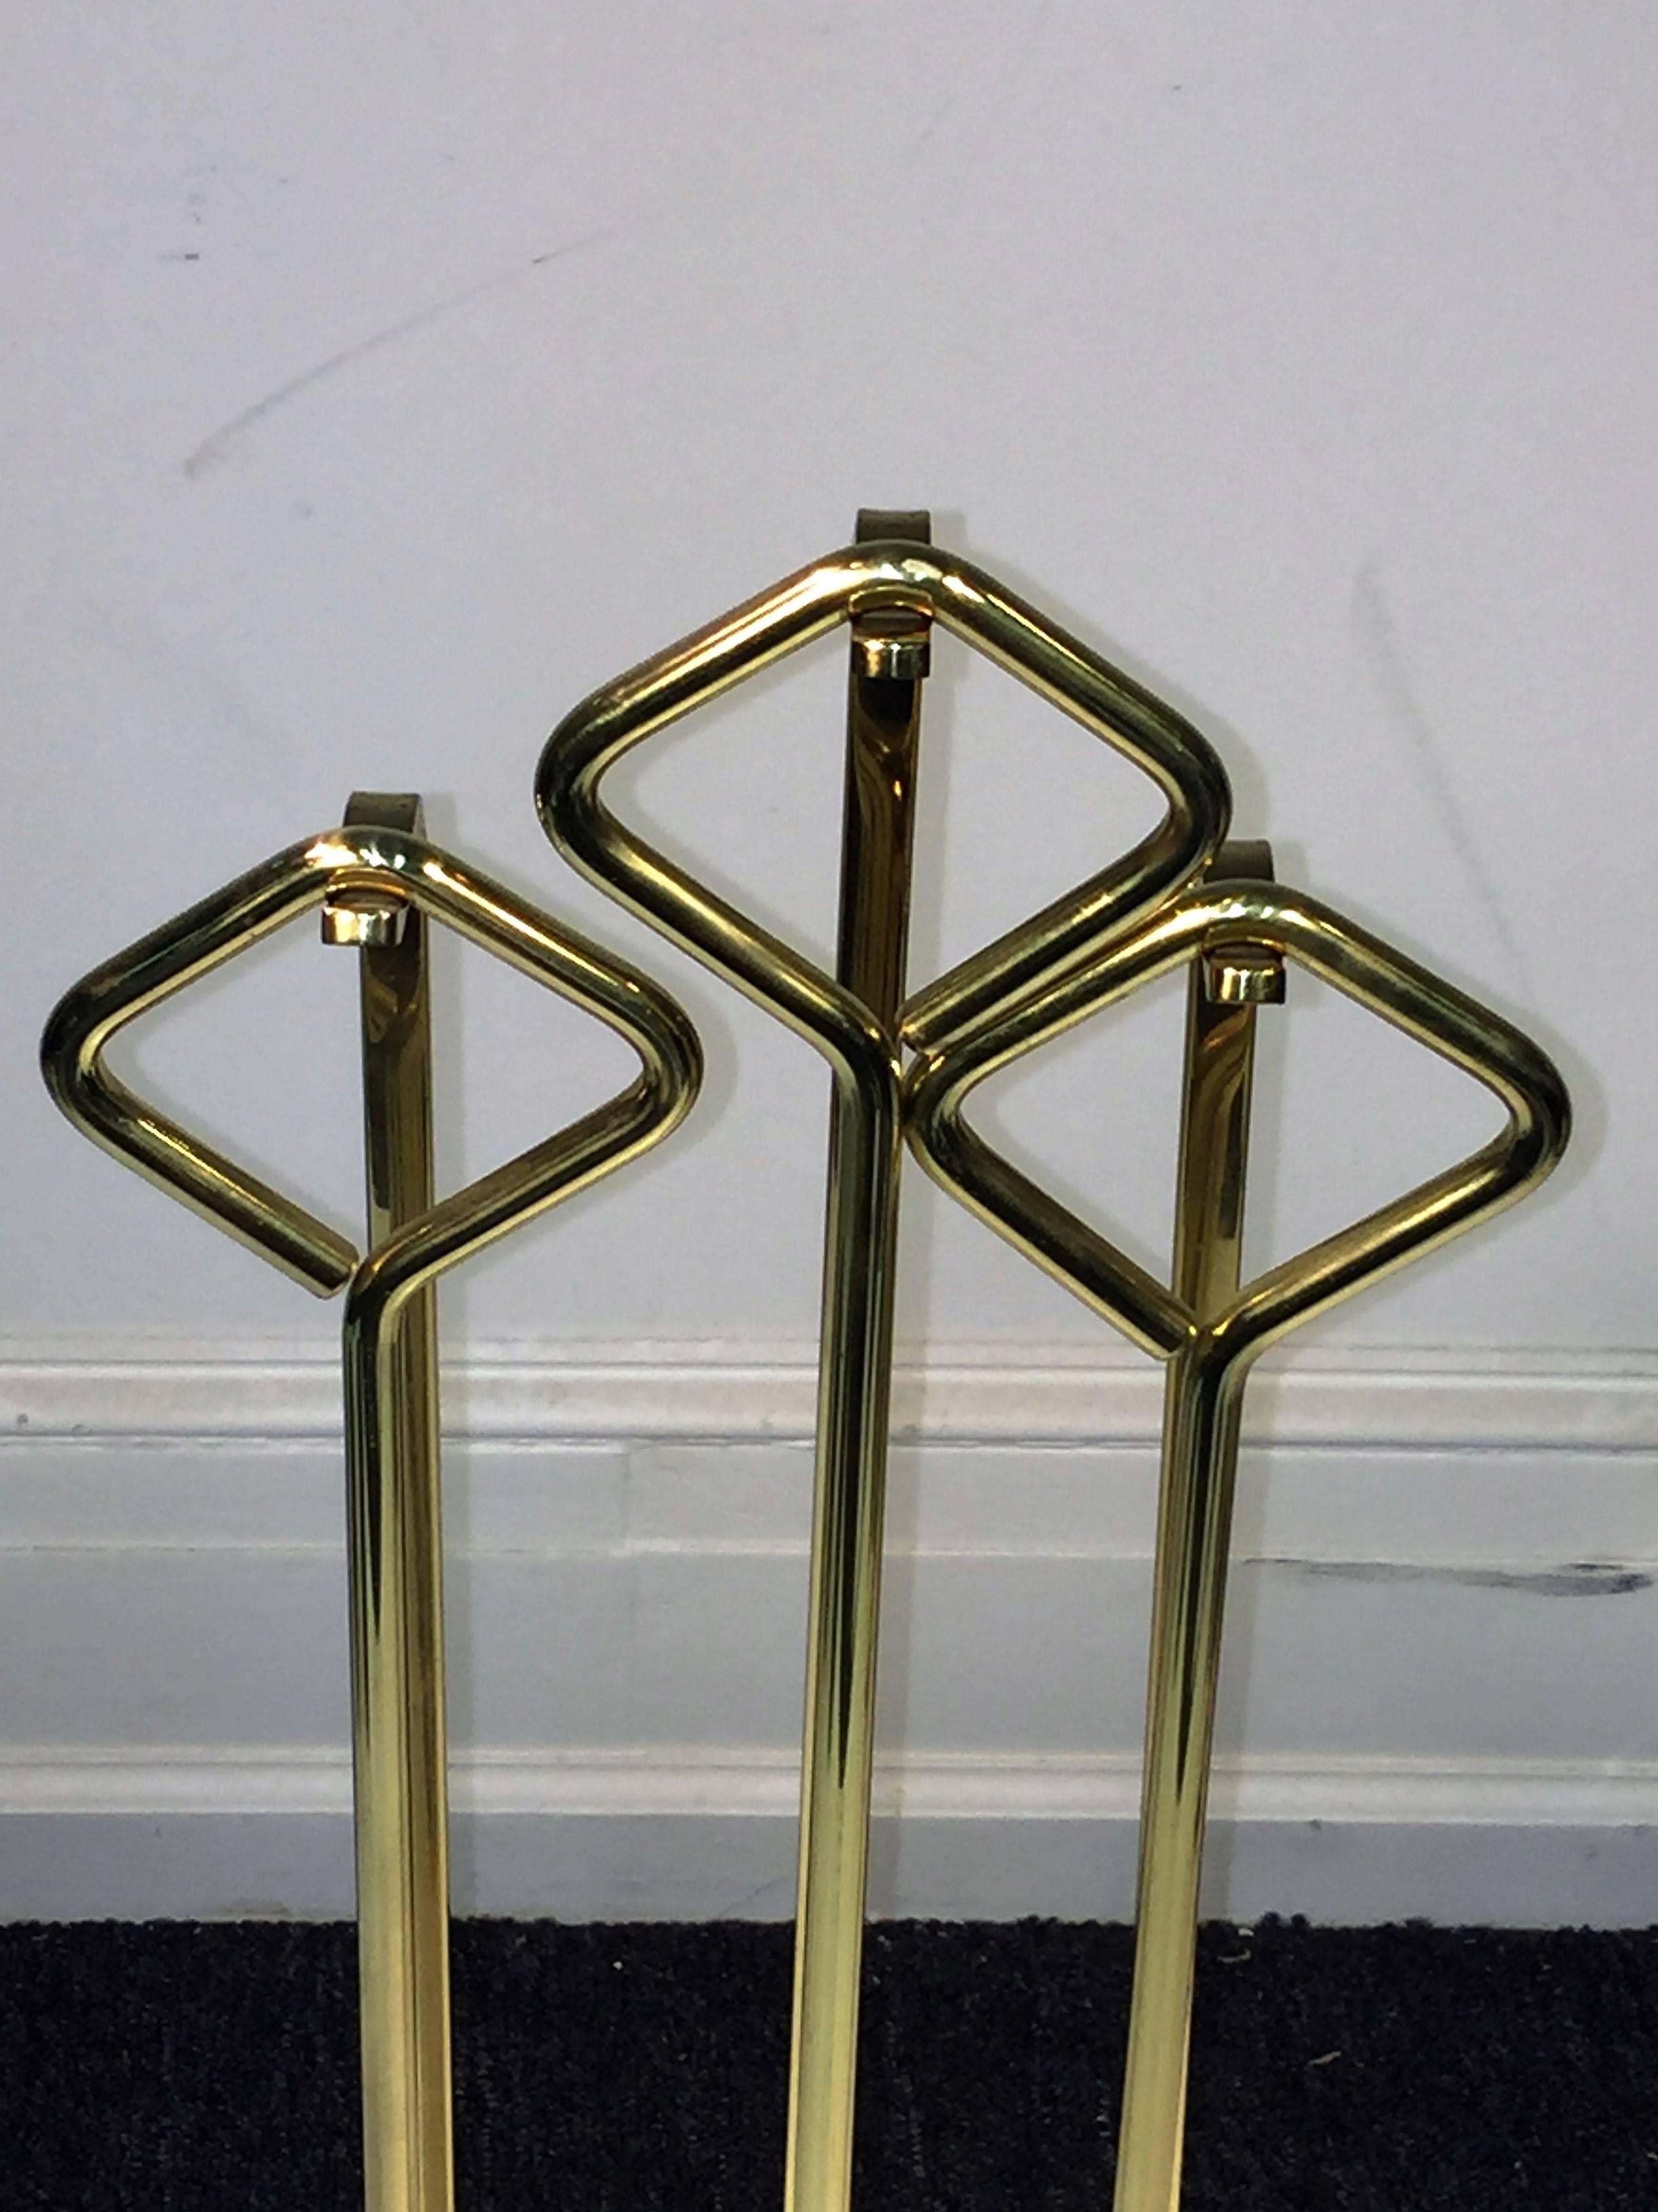 Chic Italian set of three-tool firetools designed of goldtone metal and standing upon a thick rectangle glass base. With diamond shaped handles the poker, brush and shovel are very modern and sleek designed. The glass base measures at 9 1/2